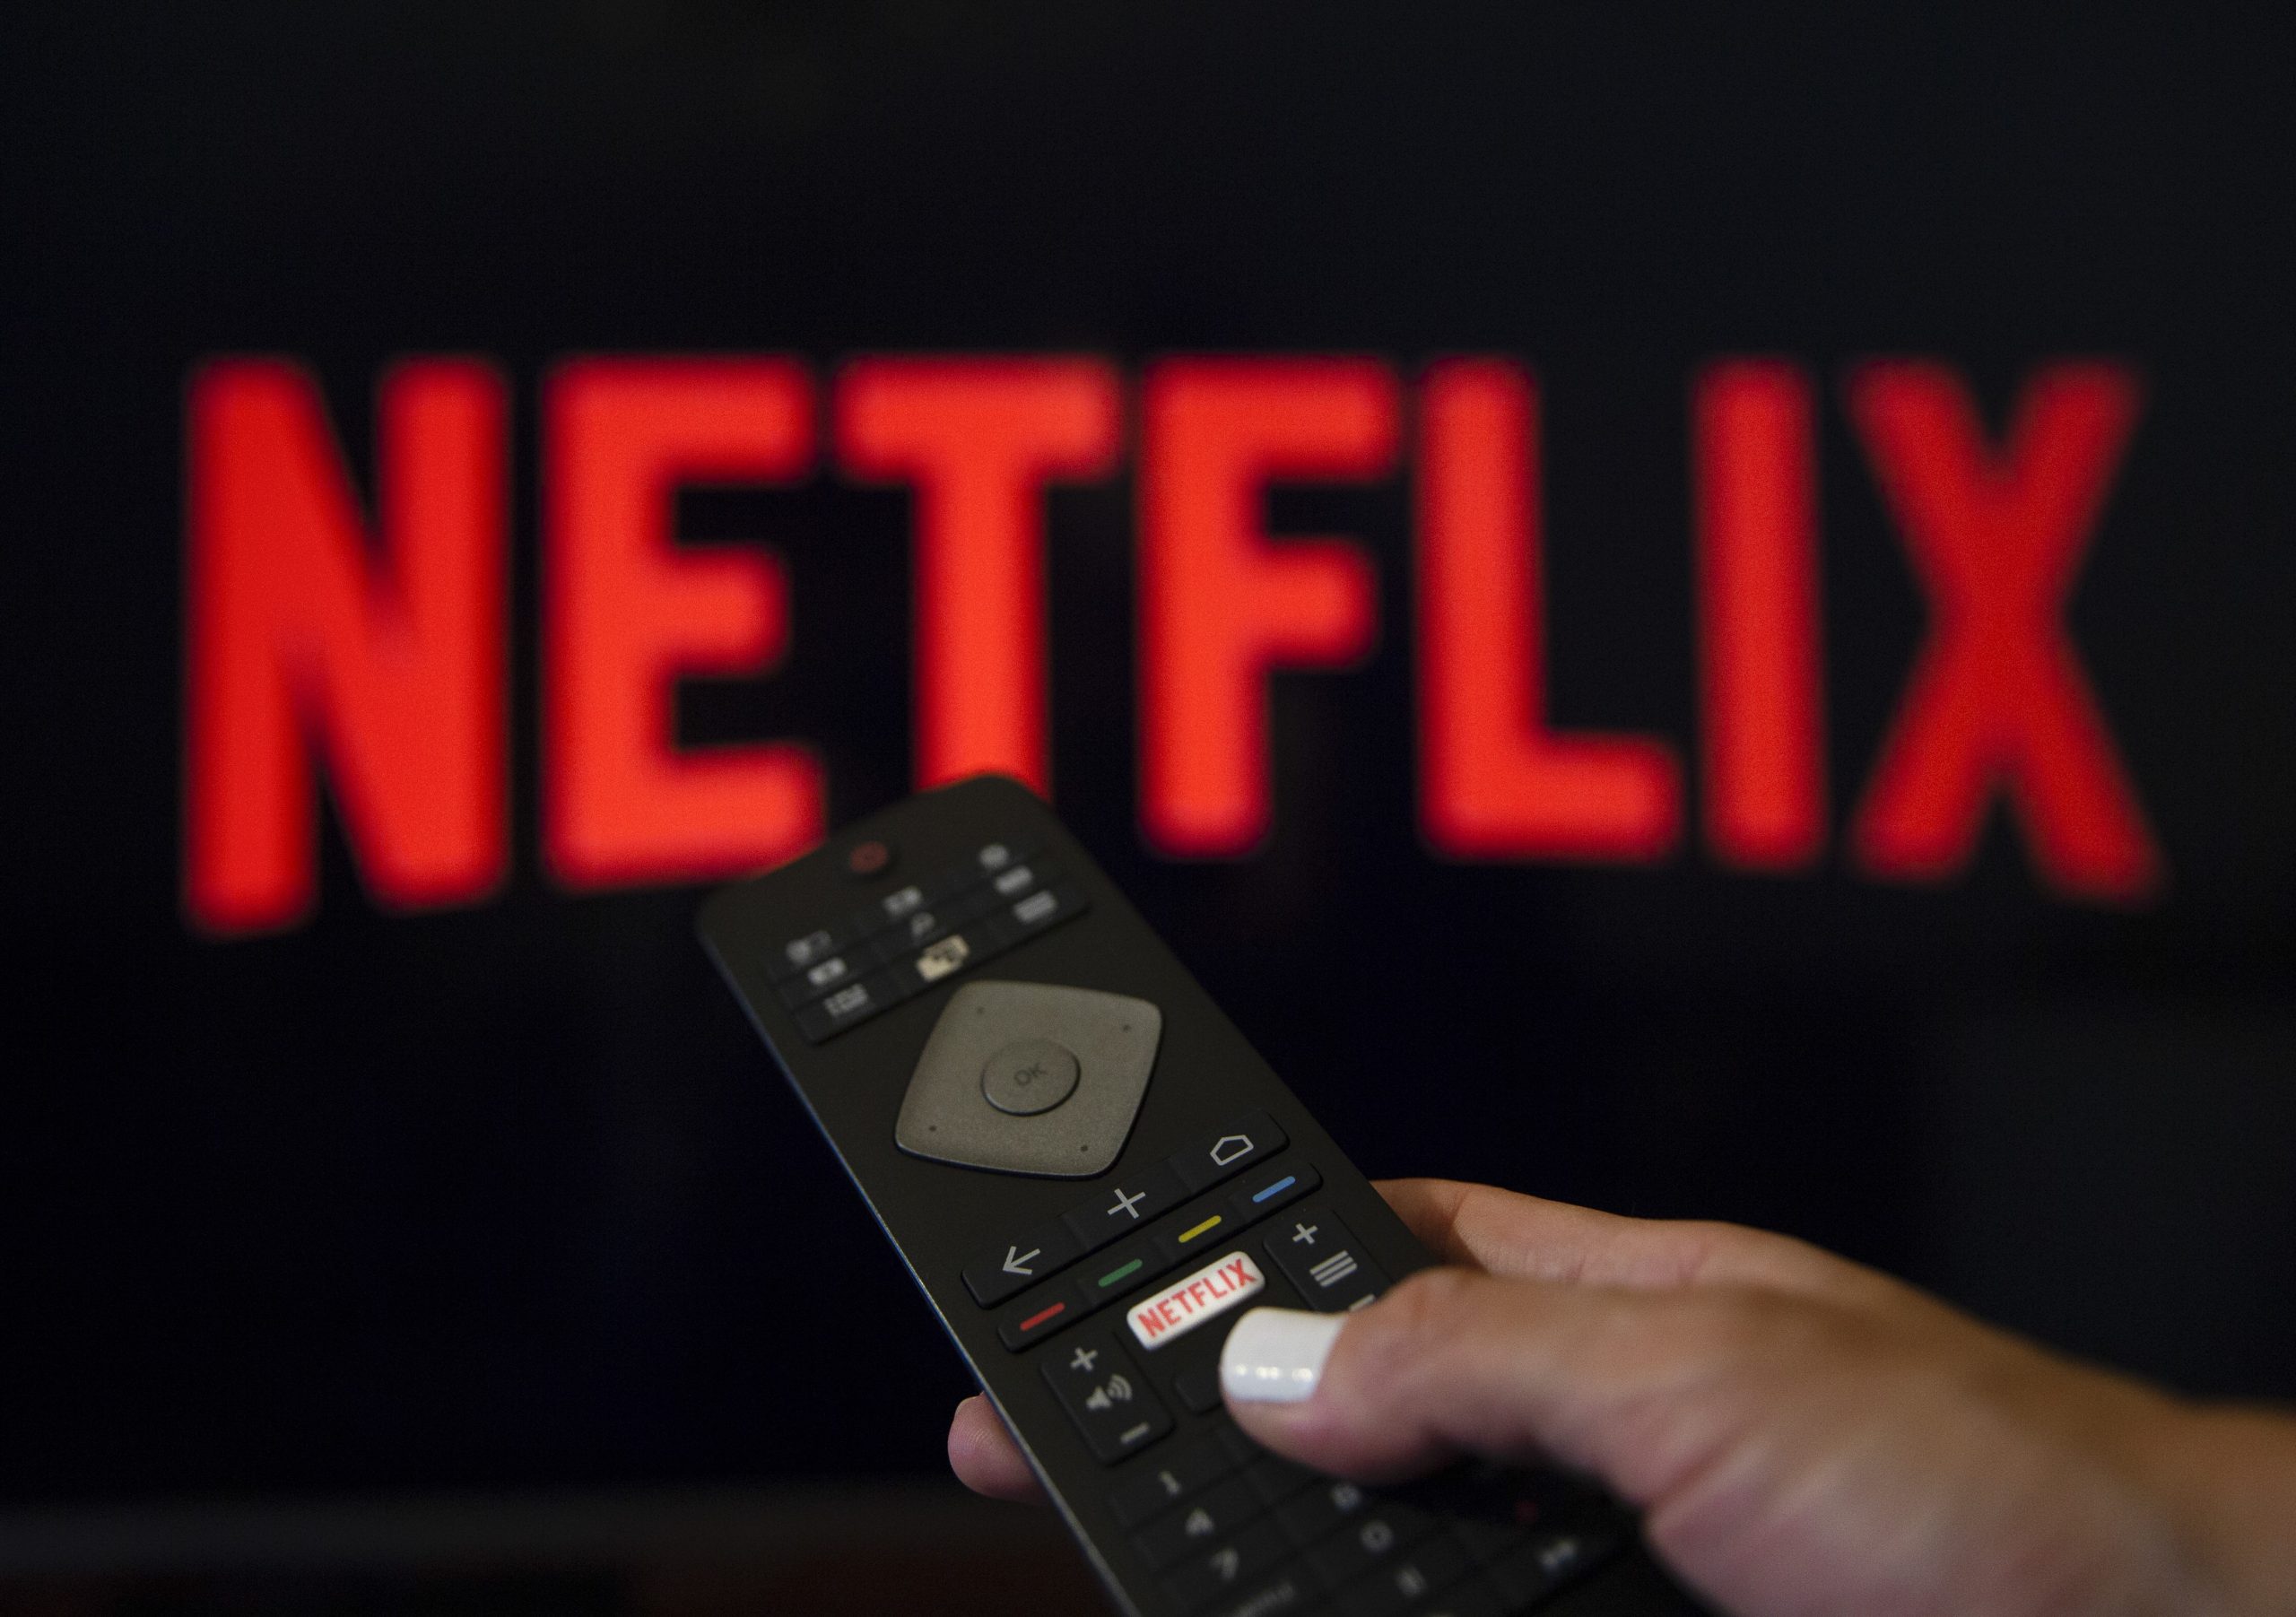 One of the most important milestones in Netflix history may come